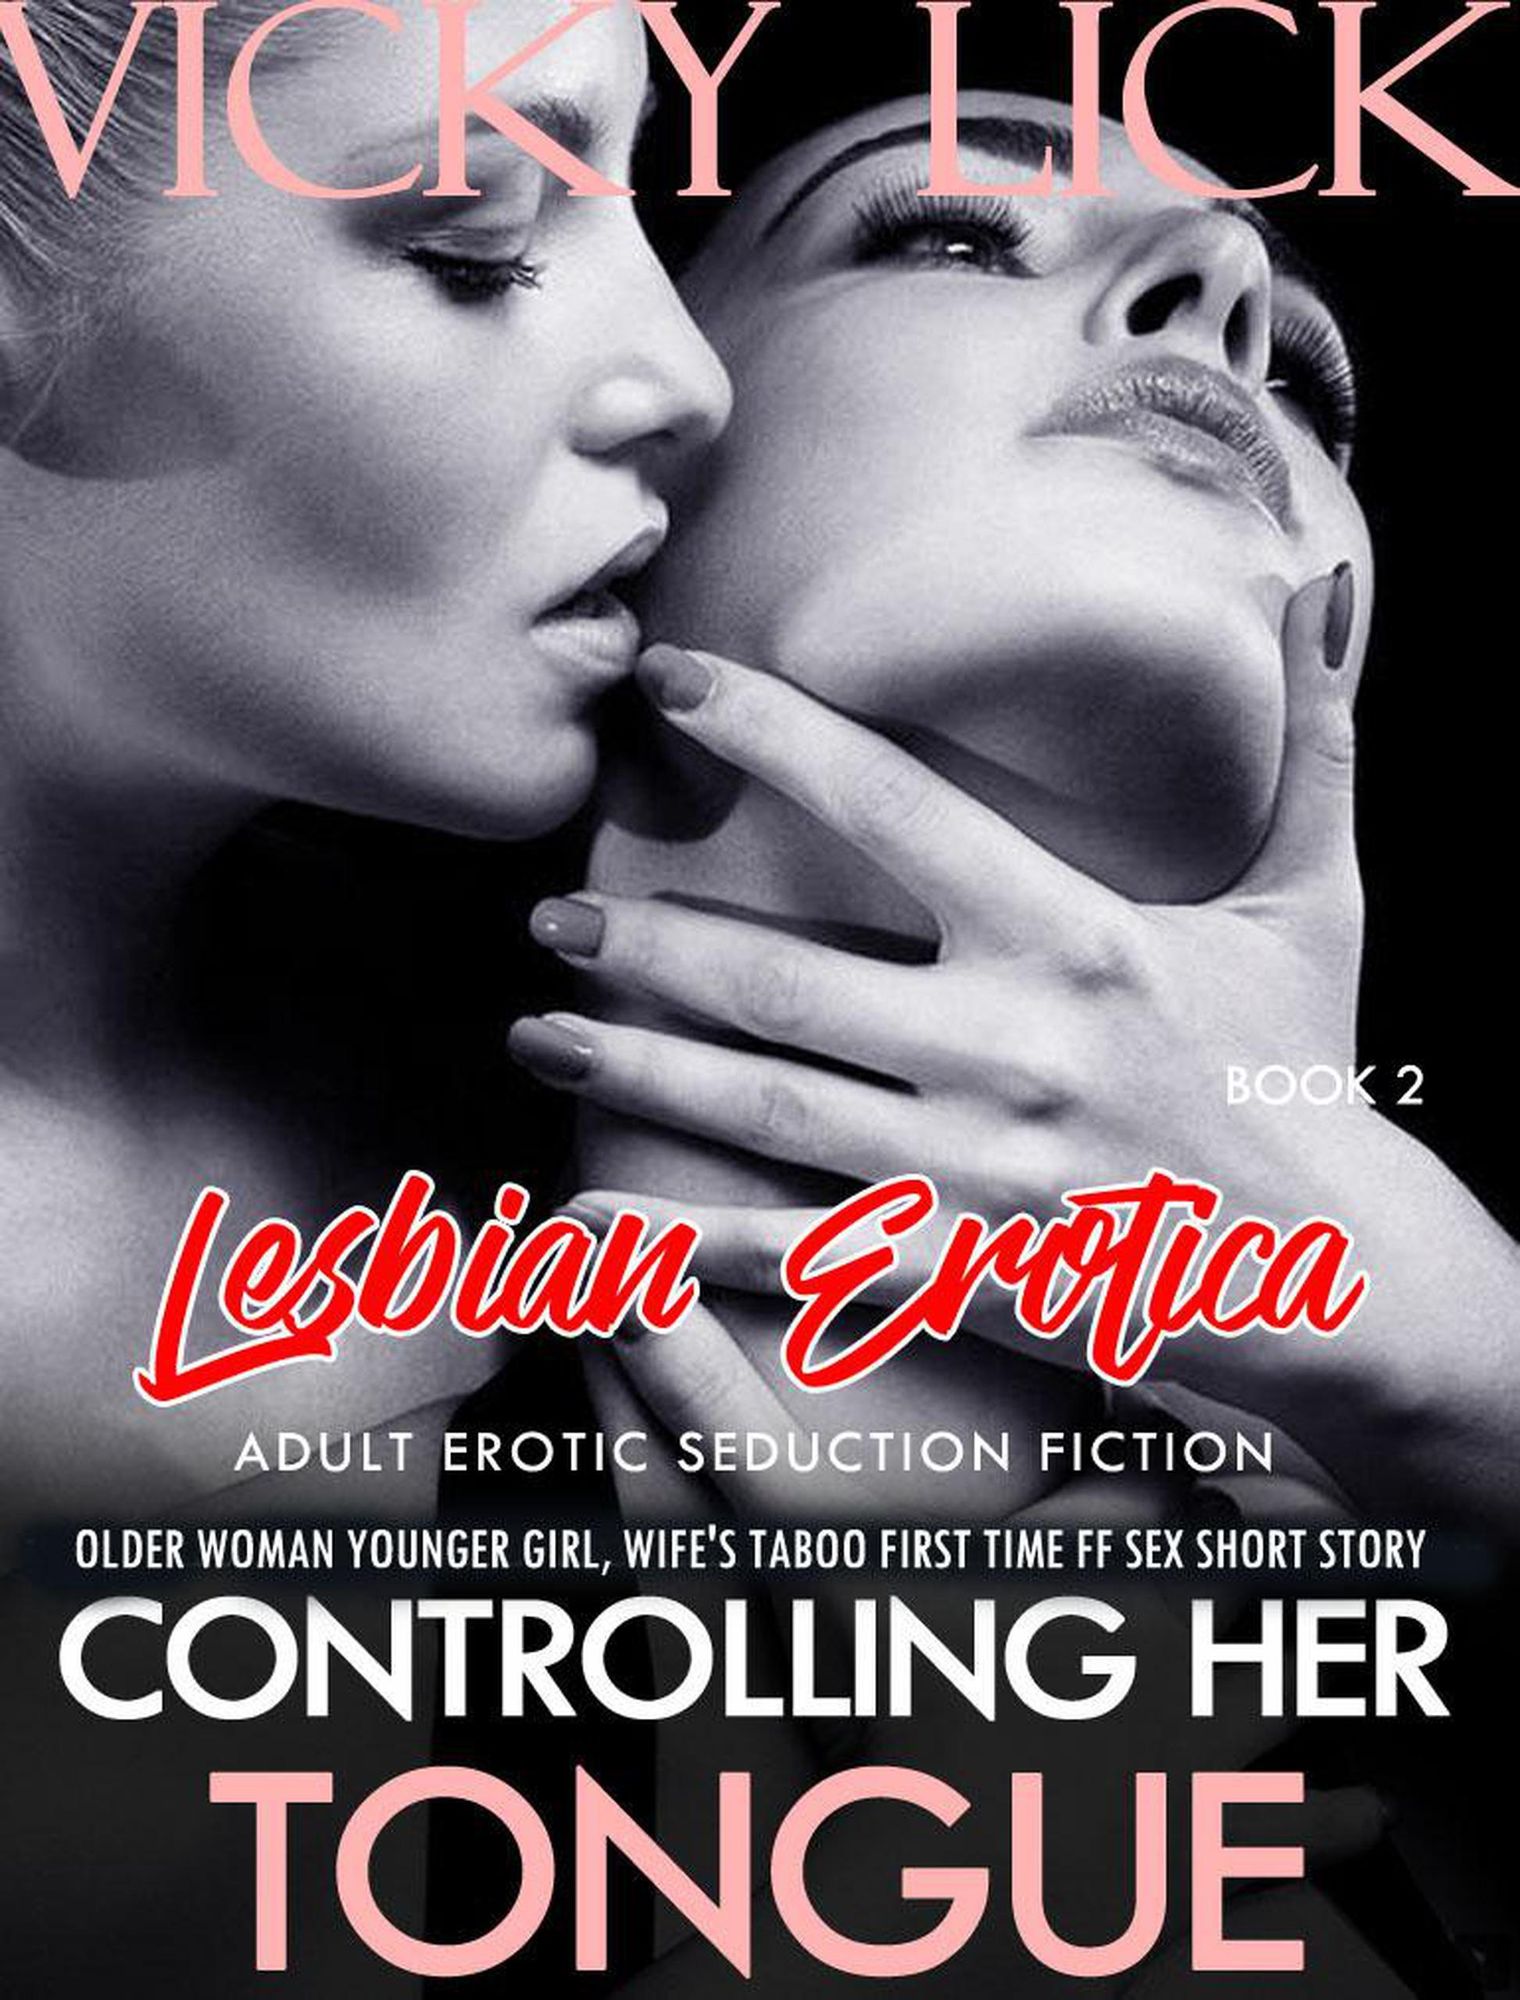 Lesbian Erotica Controlling Her Tongue - Older Woman Younger Girl, Wifes Taboo First Time FF Sex Short Story (Adult Erotic Seduction Fiction, #2) von Vicky Lick picture